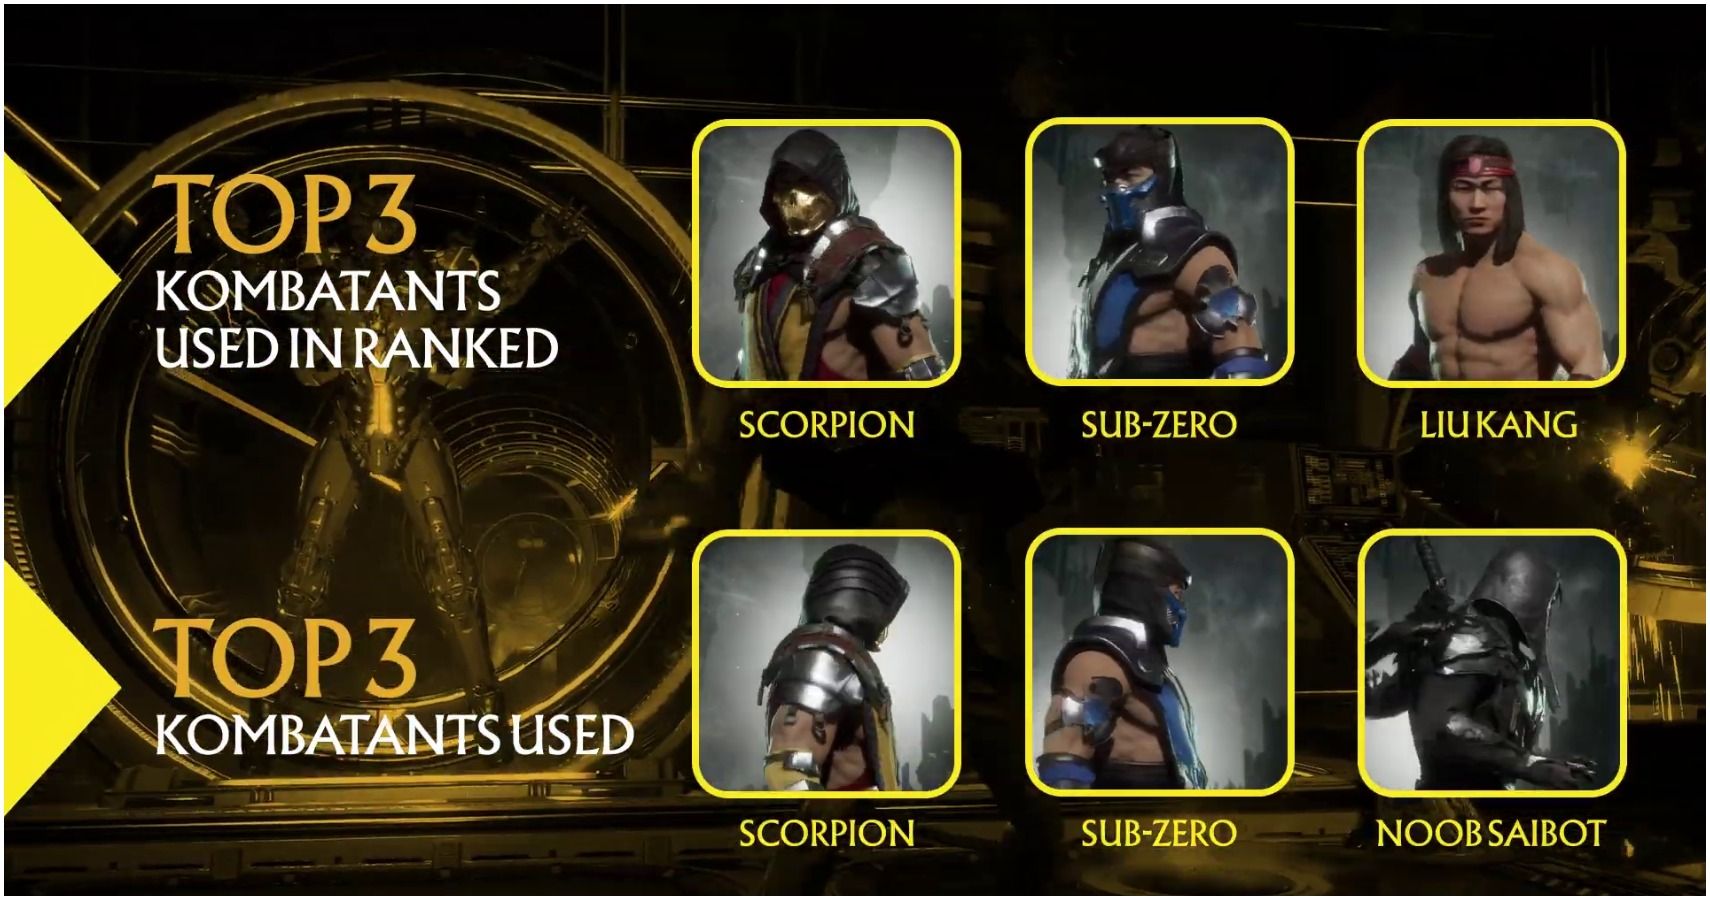 Mortal Kombat 11 Scorpion Has Won The Most And Suffered The Most Fatalities